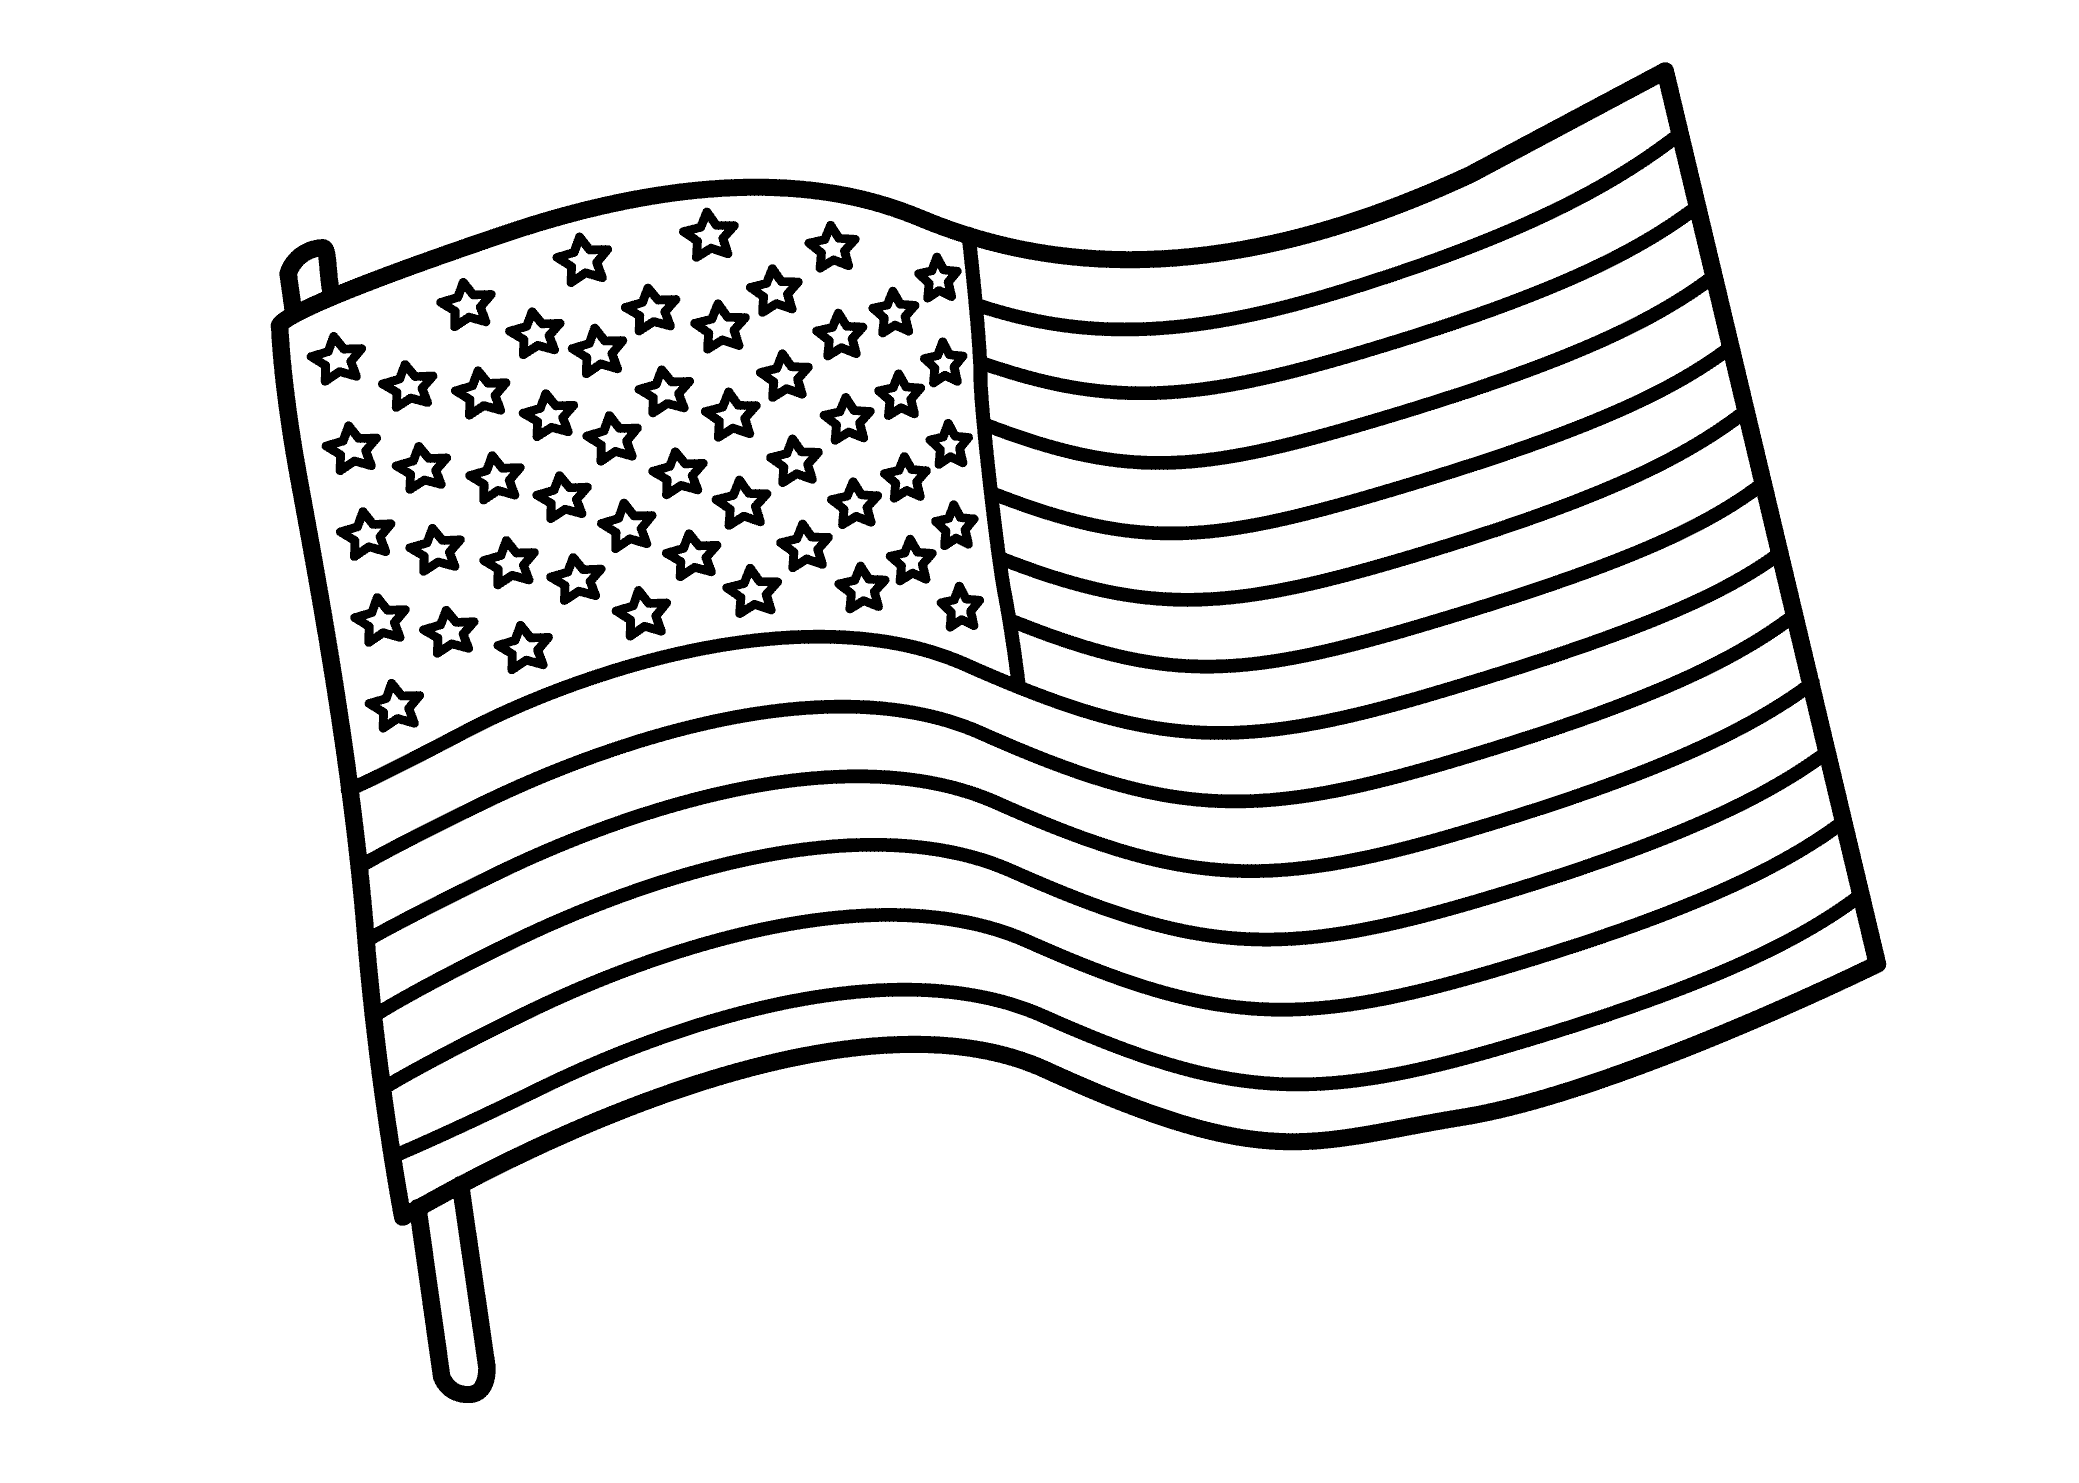 united states flag coloring page american flag coloring pages best coloring pages for kids page united states flag coloring 